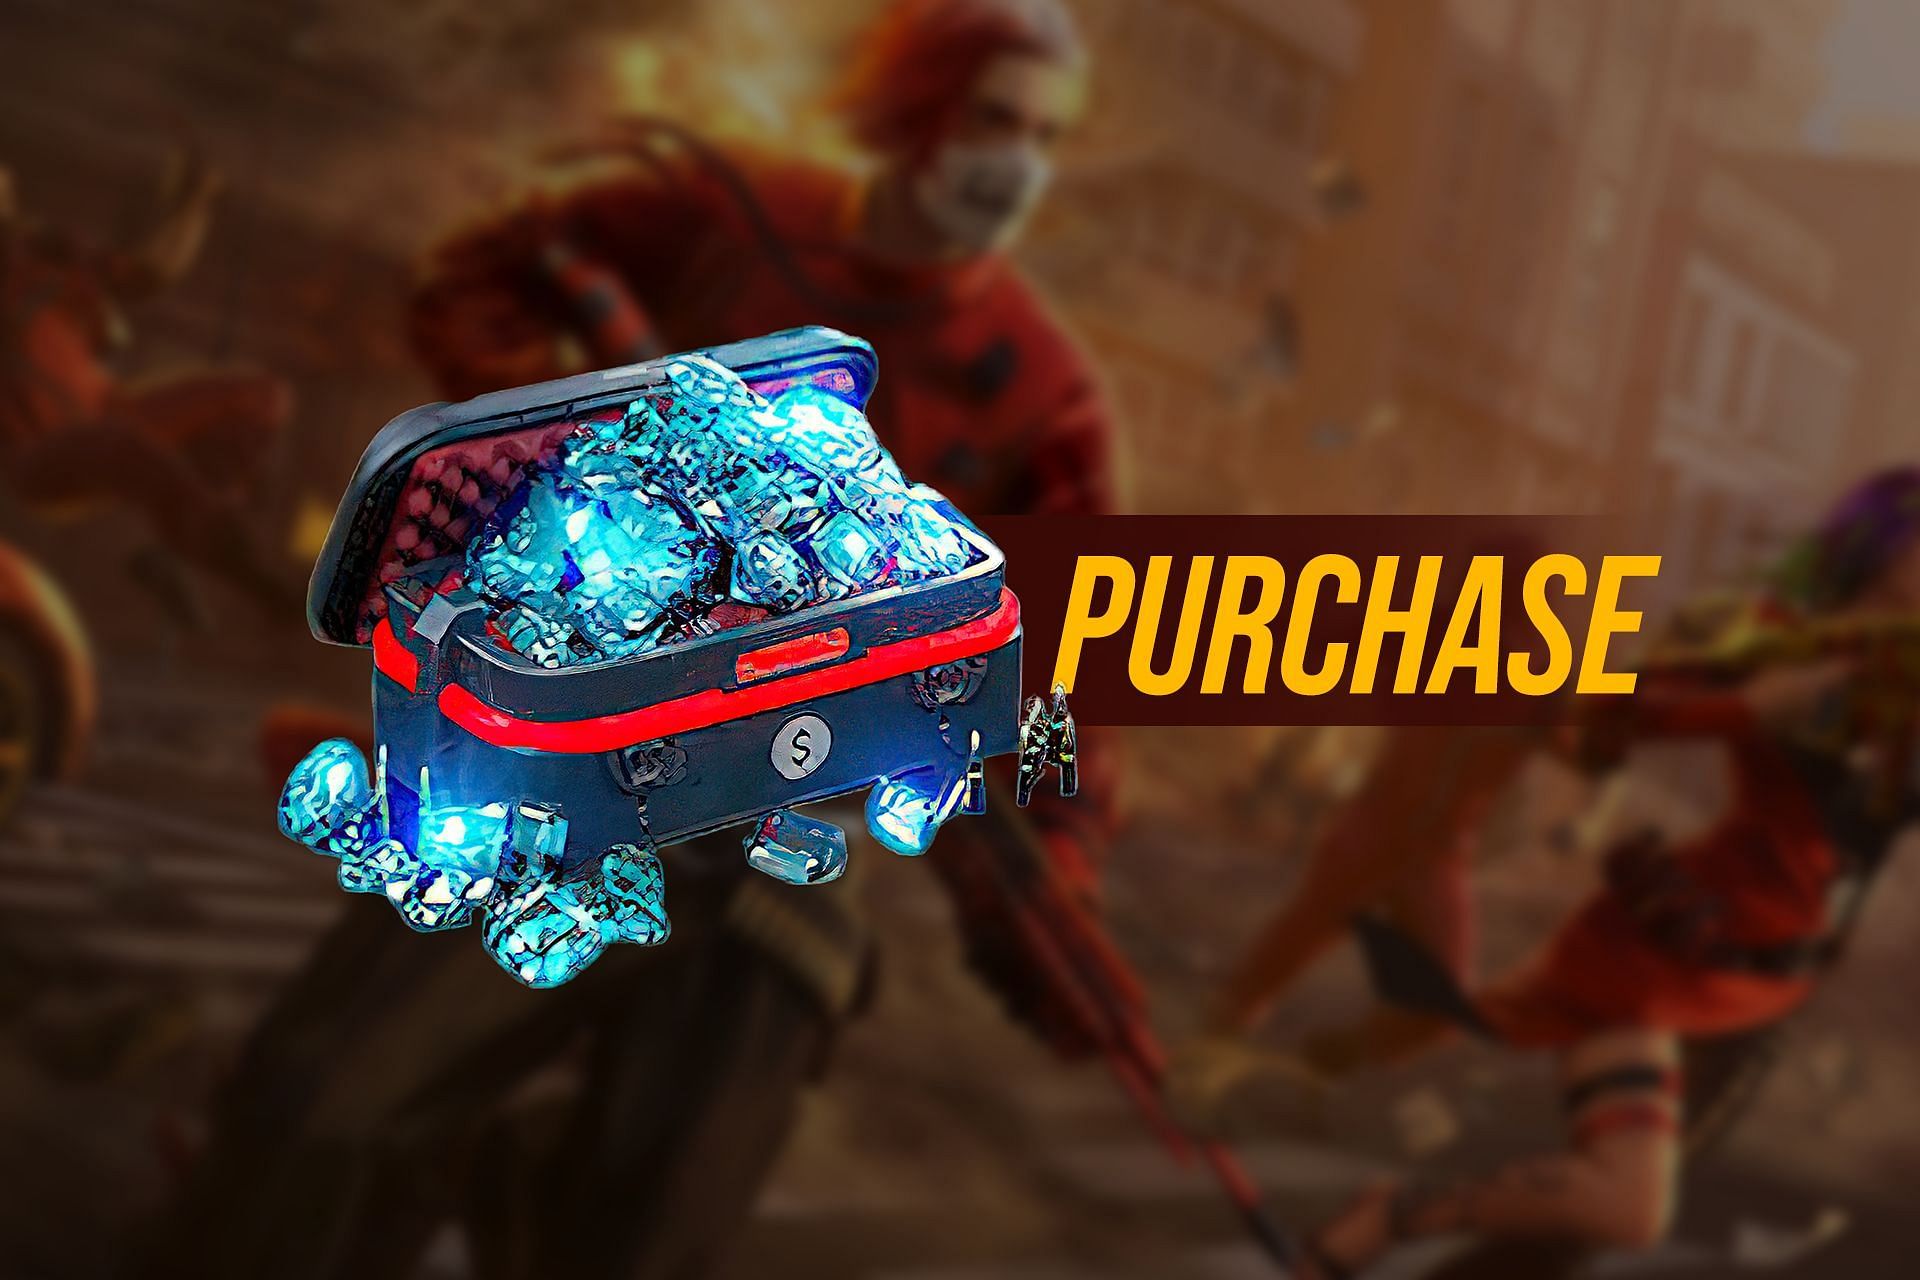 How to purchase diamonds in Free Fire MAX to get free gun skin this week